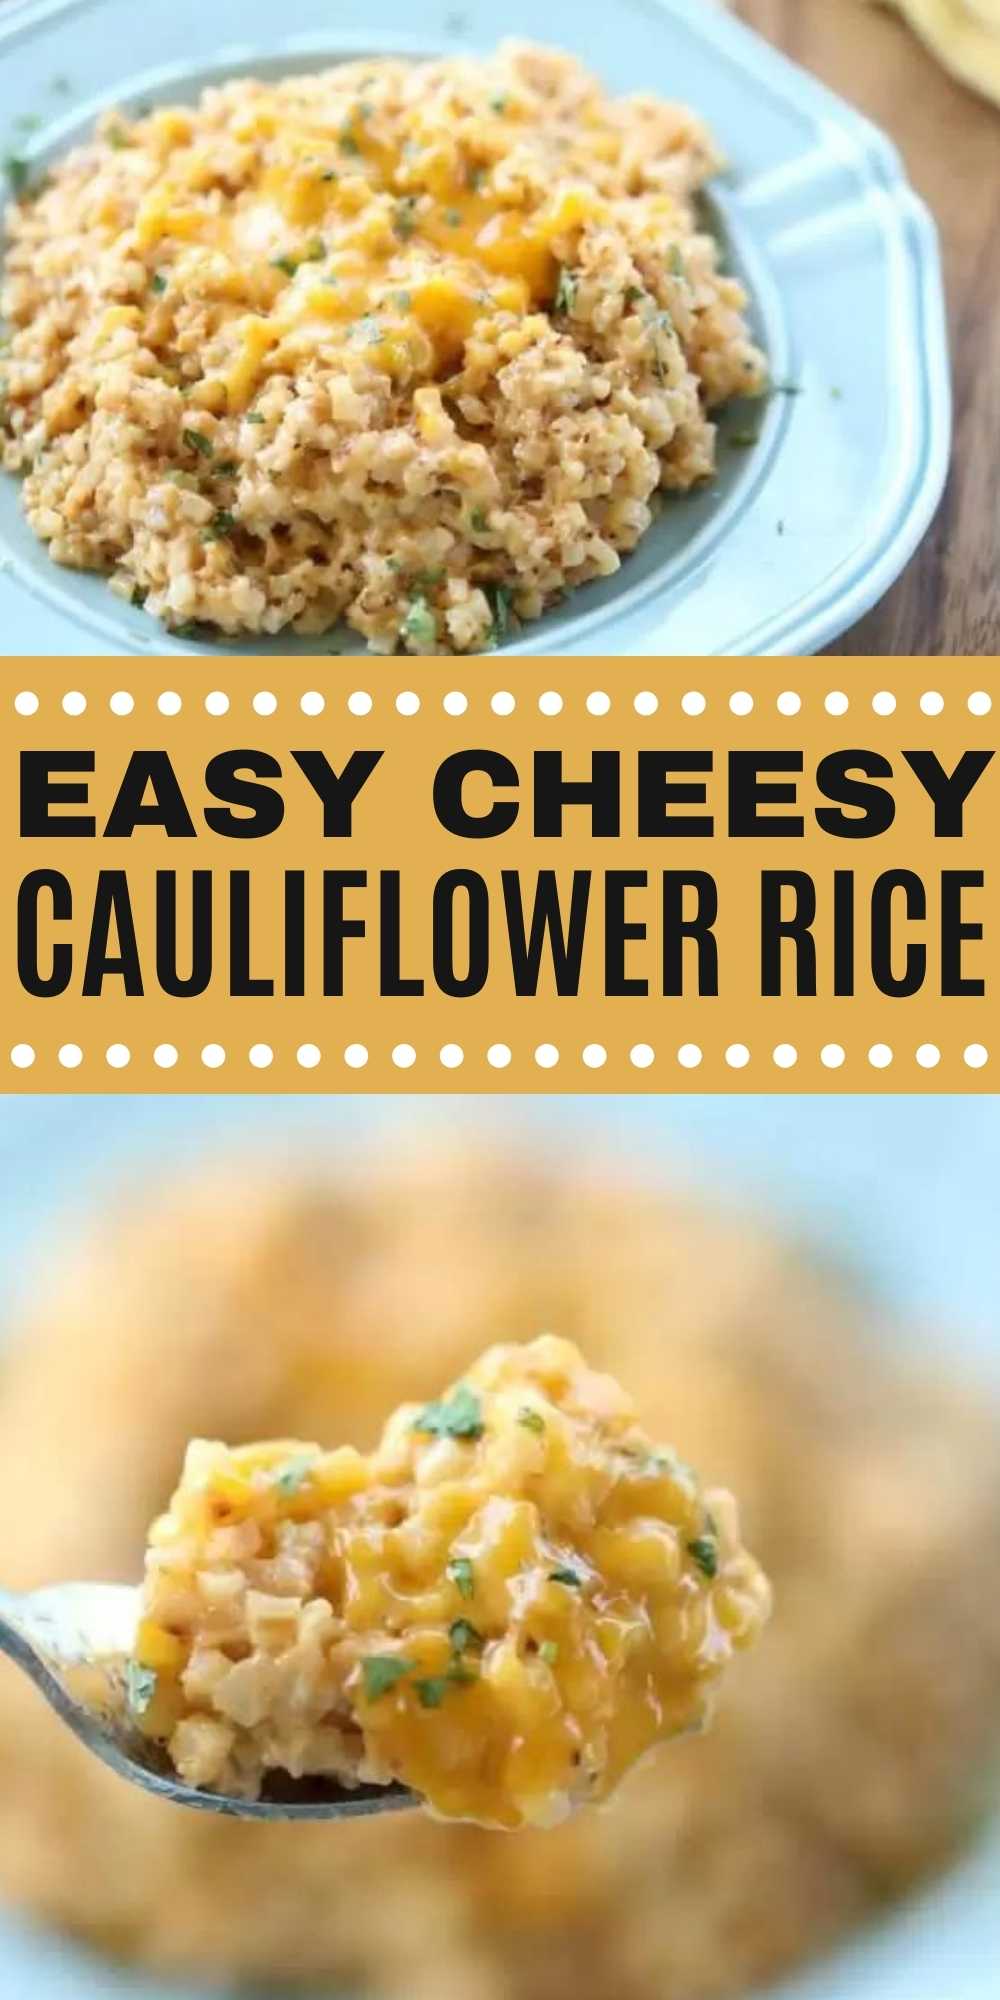 Looking for an easy keto side dish? You're going to love Easy Cheesy Cauliflower Rice. It is easy, cheesy and the best low carb side dish. This cheesy cauliflower rice is super easy to make and packed with tons of flavor too.  #eatingonadime #ketorecipes #lowcarbrecipes #cauliflowerricerecipes #sidedishrecipes 
